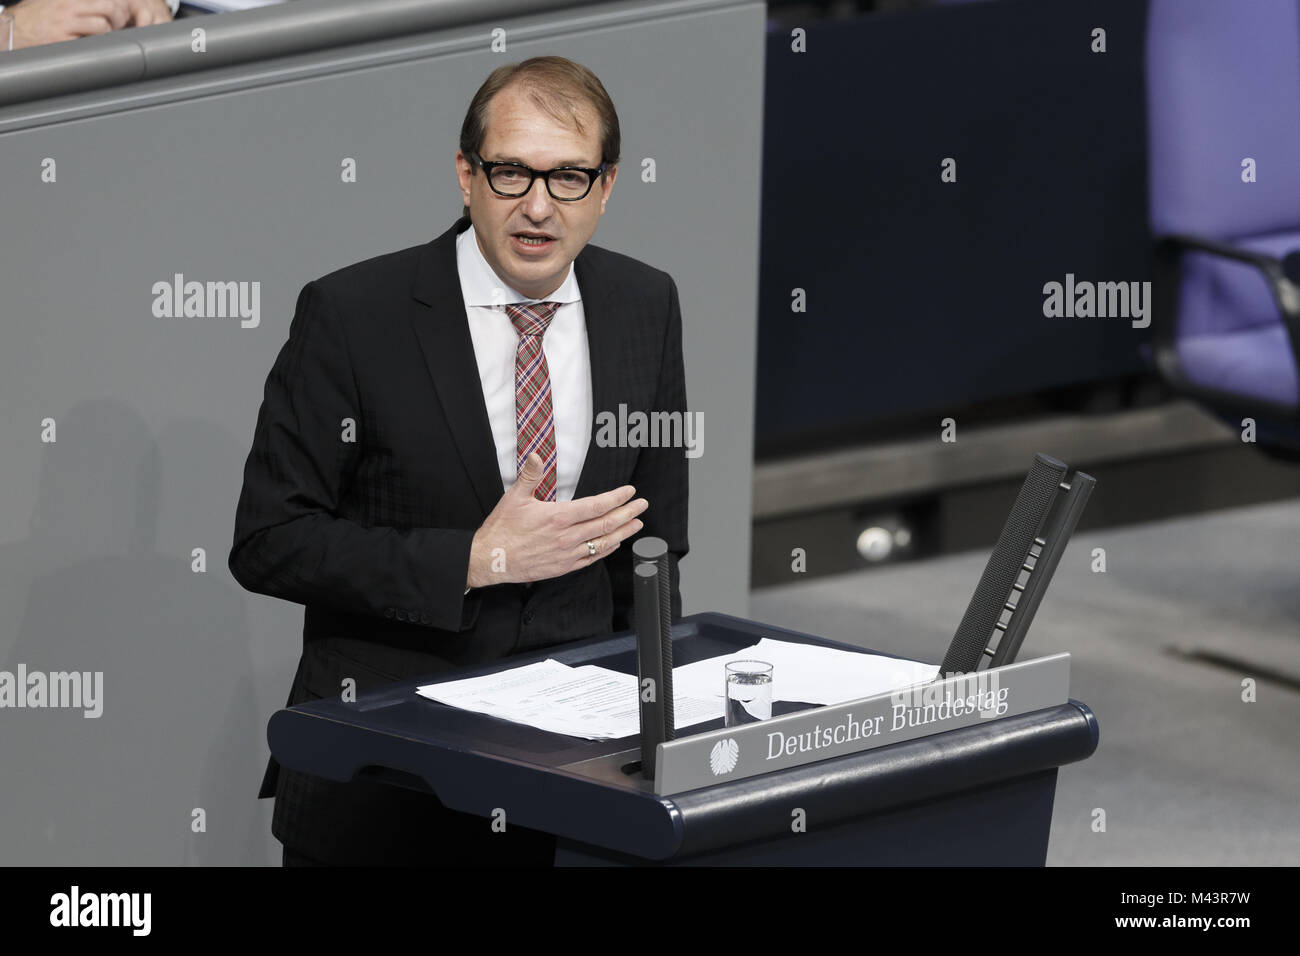 Delivery of a governmental declaration by Merkel in Bundestag Stock Photo